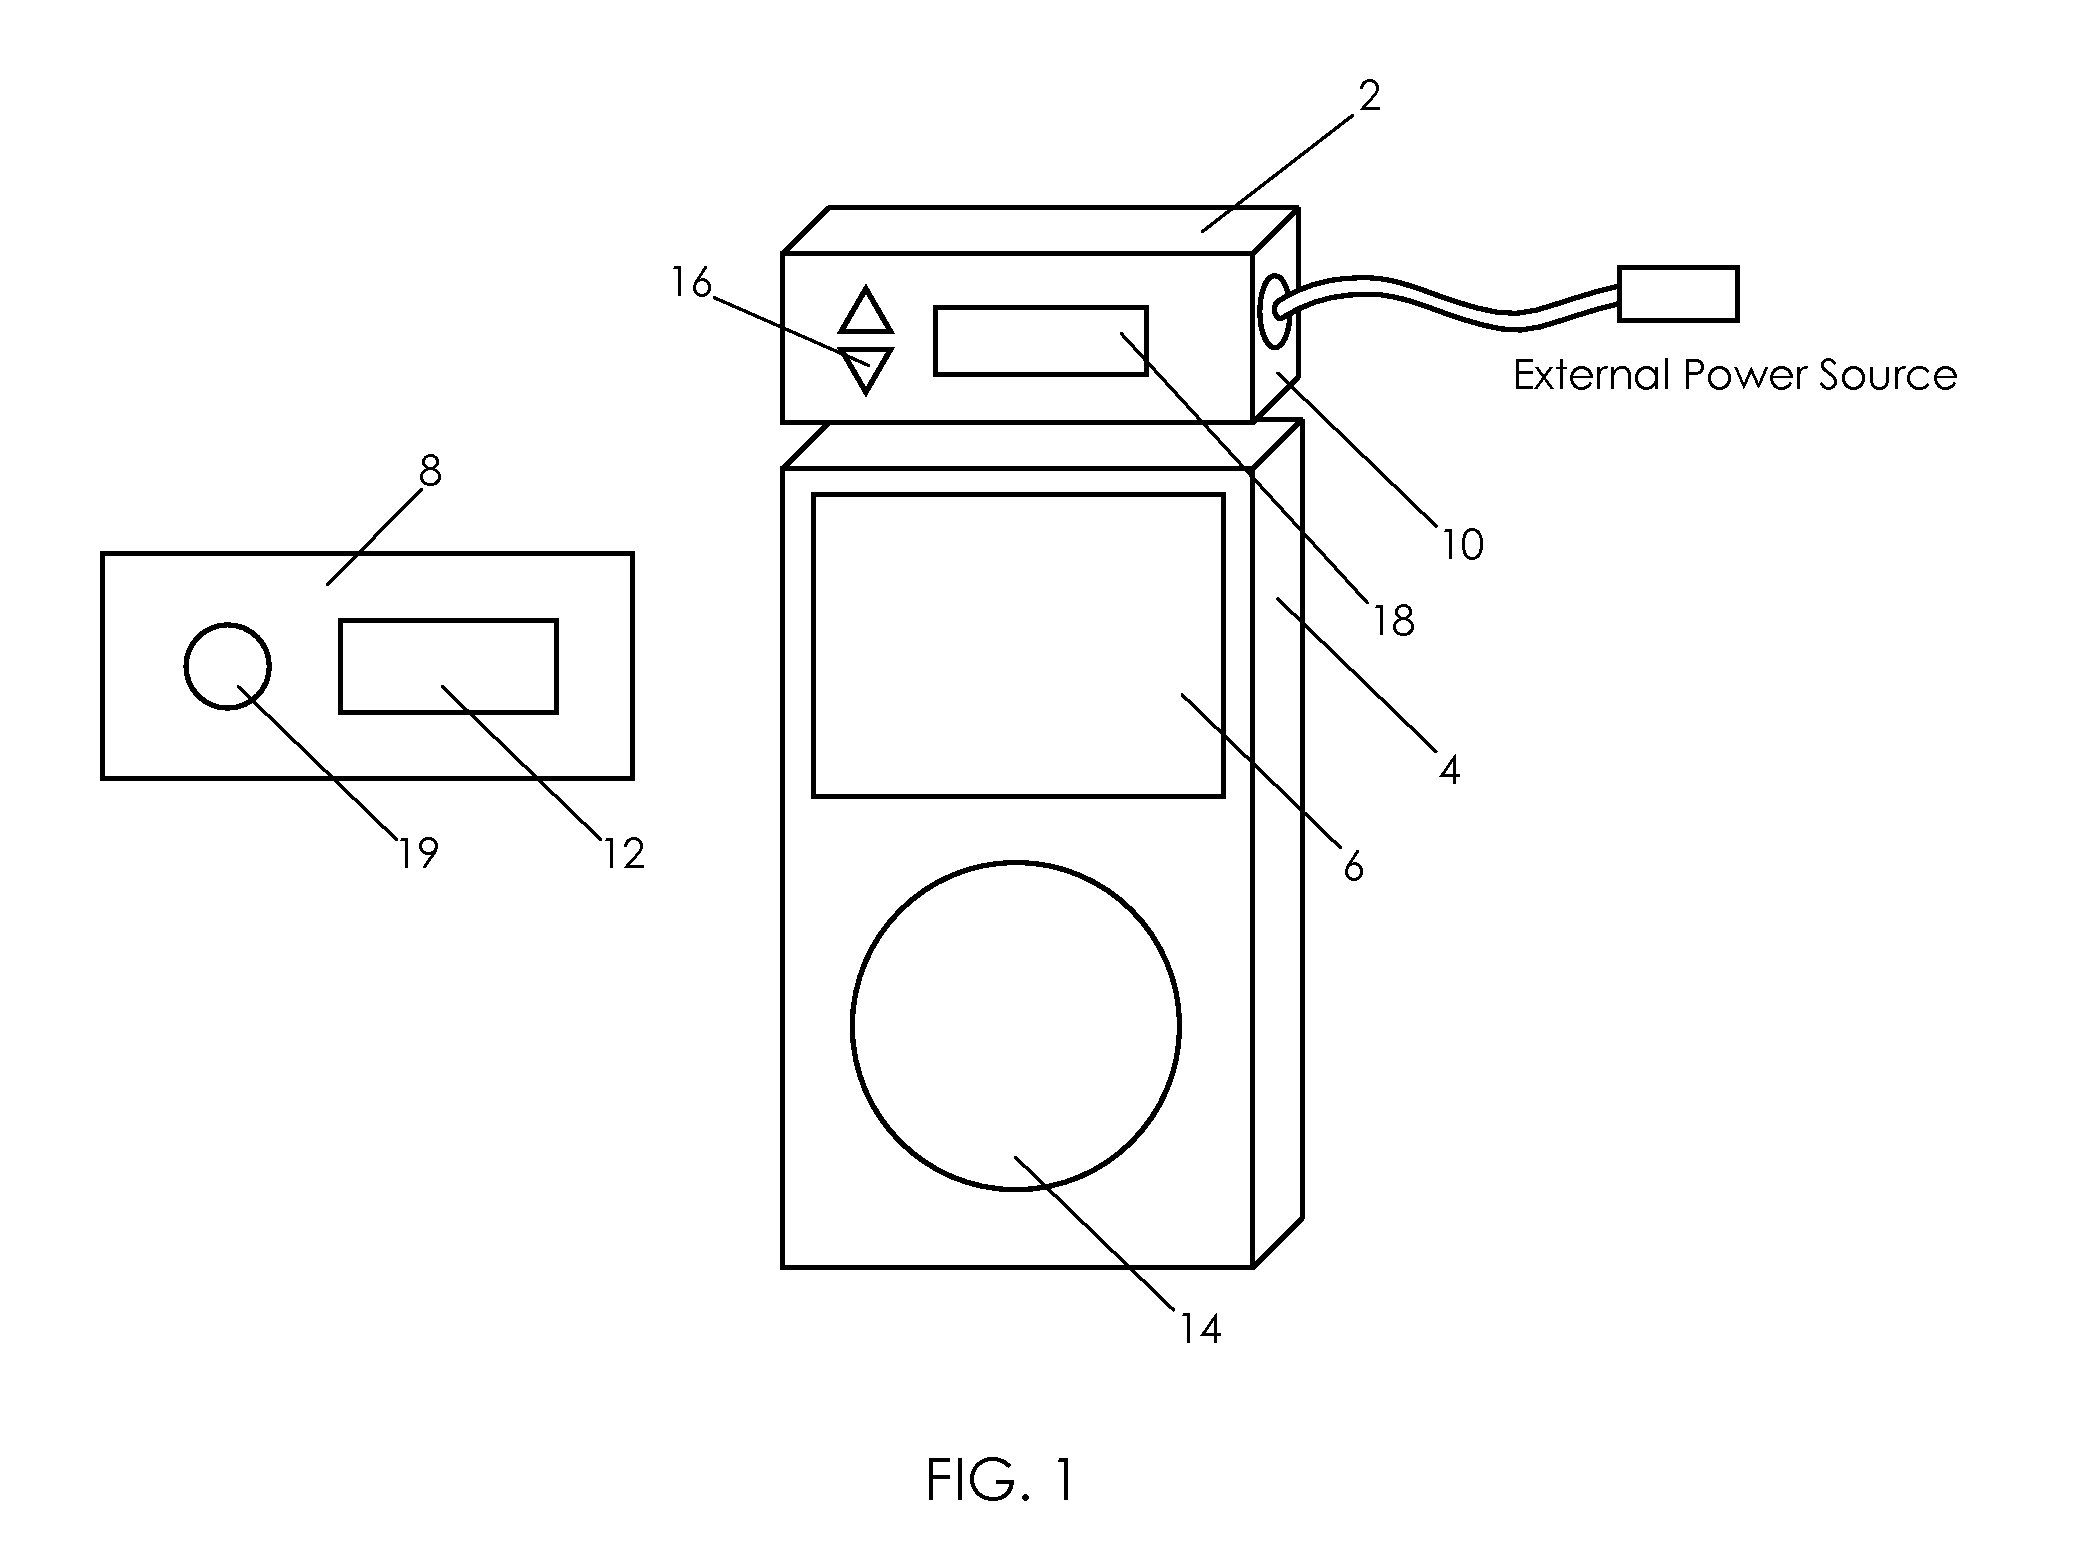 Digital controller and transmitter for portable electronic device